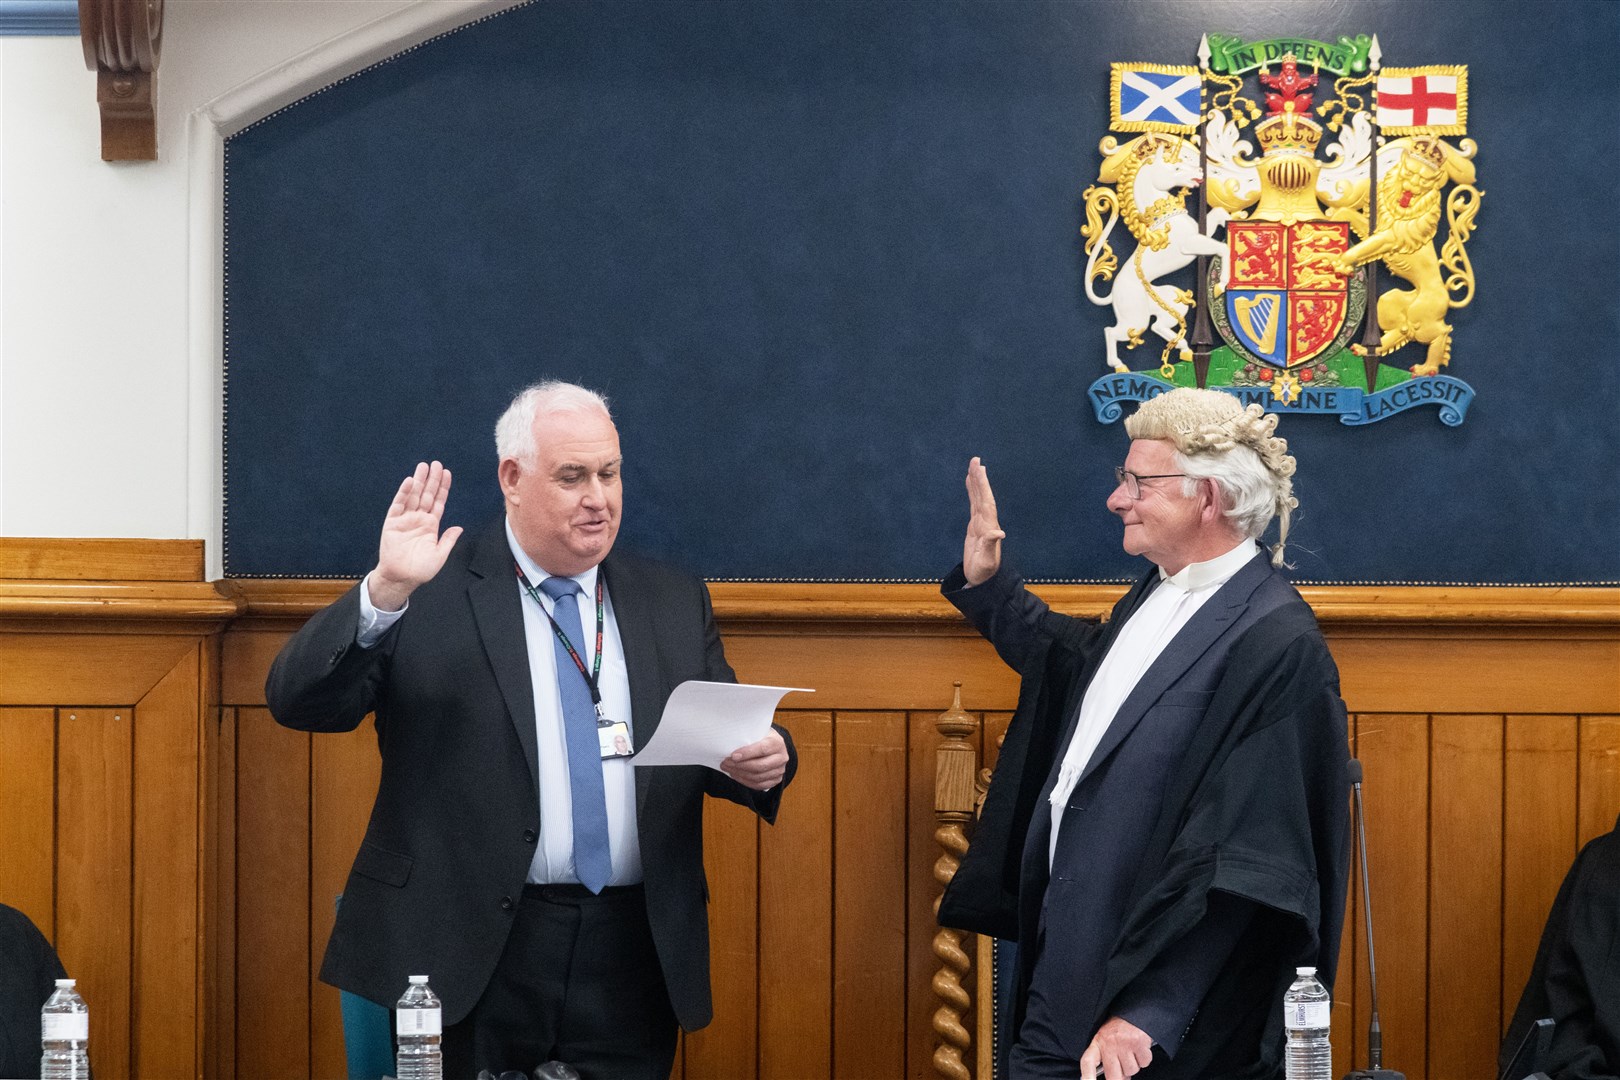 Mr Knight takes the oath of allegiance and the judicial oath. Picture: Beth Taylor